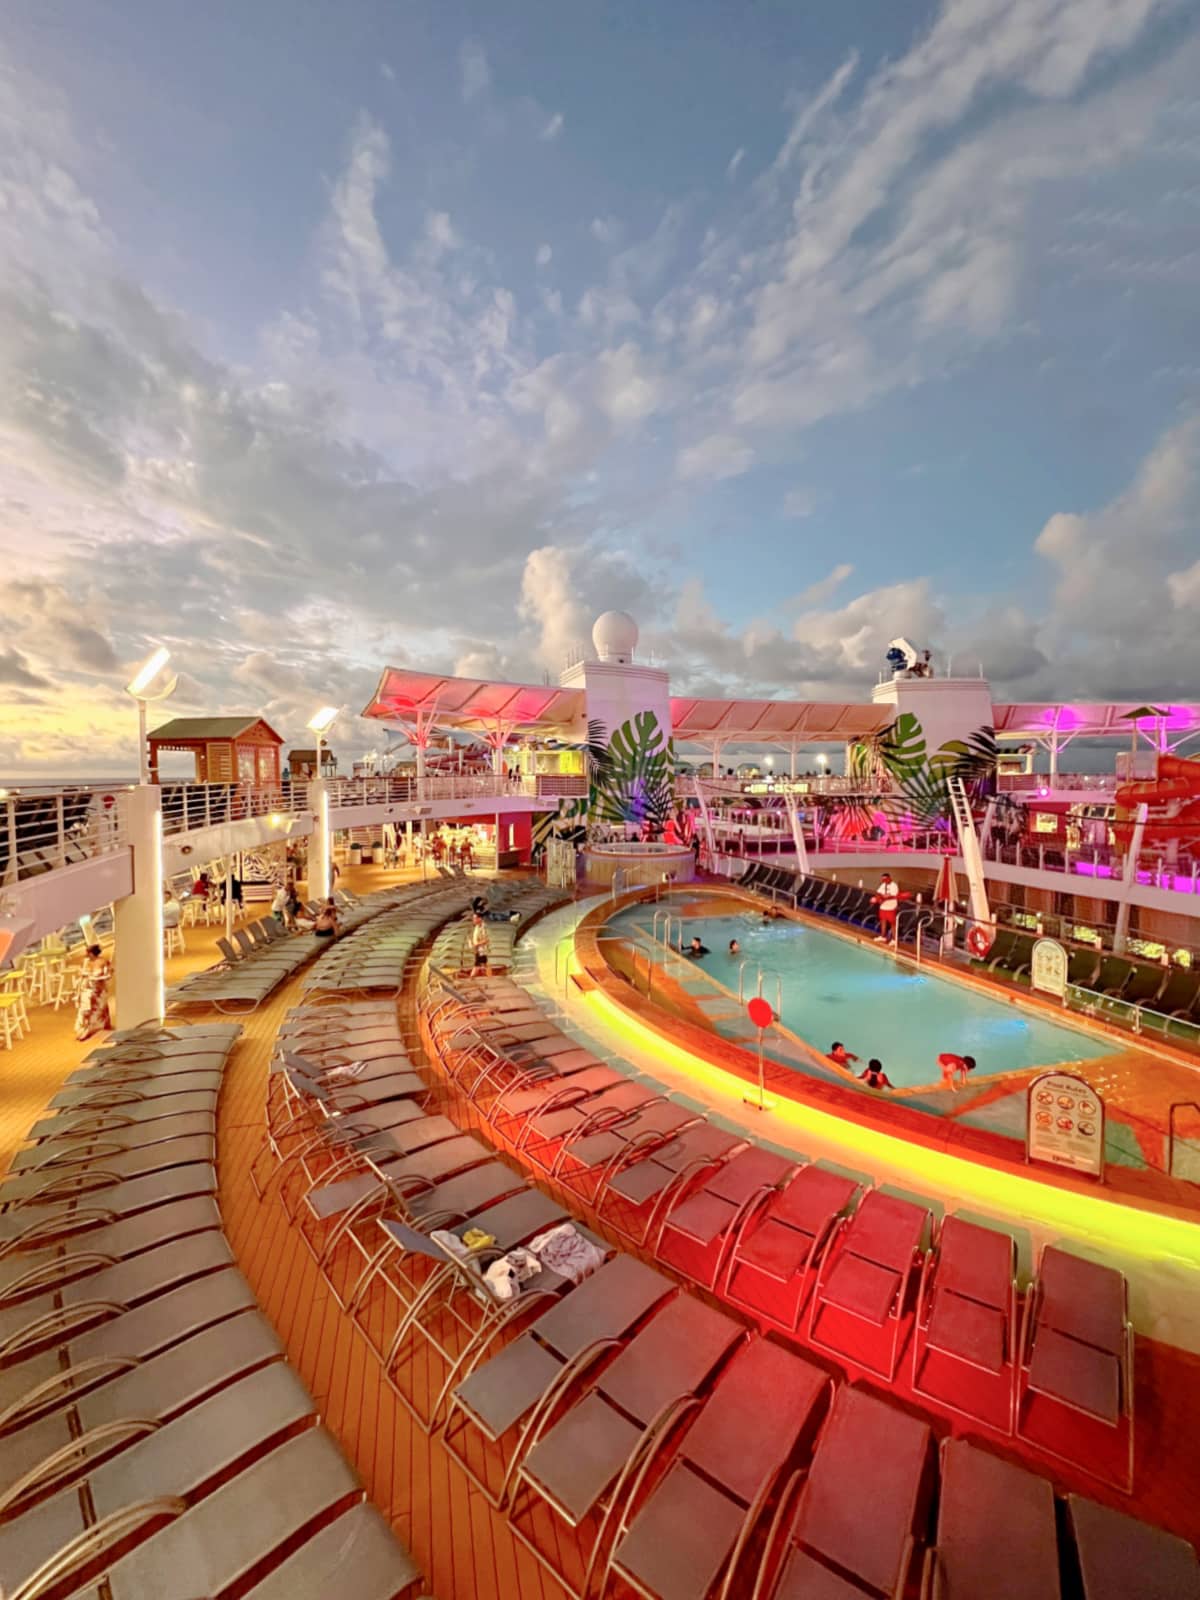 A luxurious cruise ship deck at twilight with rows of lounge chairs surrounding a lit pool. People can be seen swimming and relaxing. The sky is filled with clouds and hues of blue and pink.